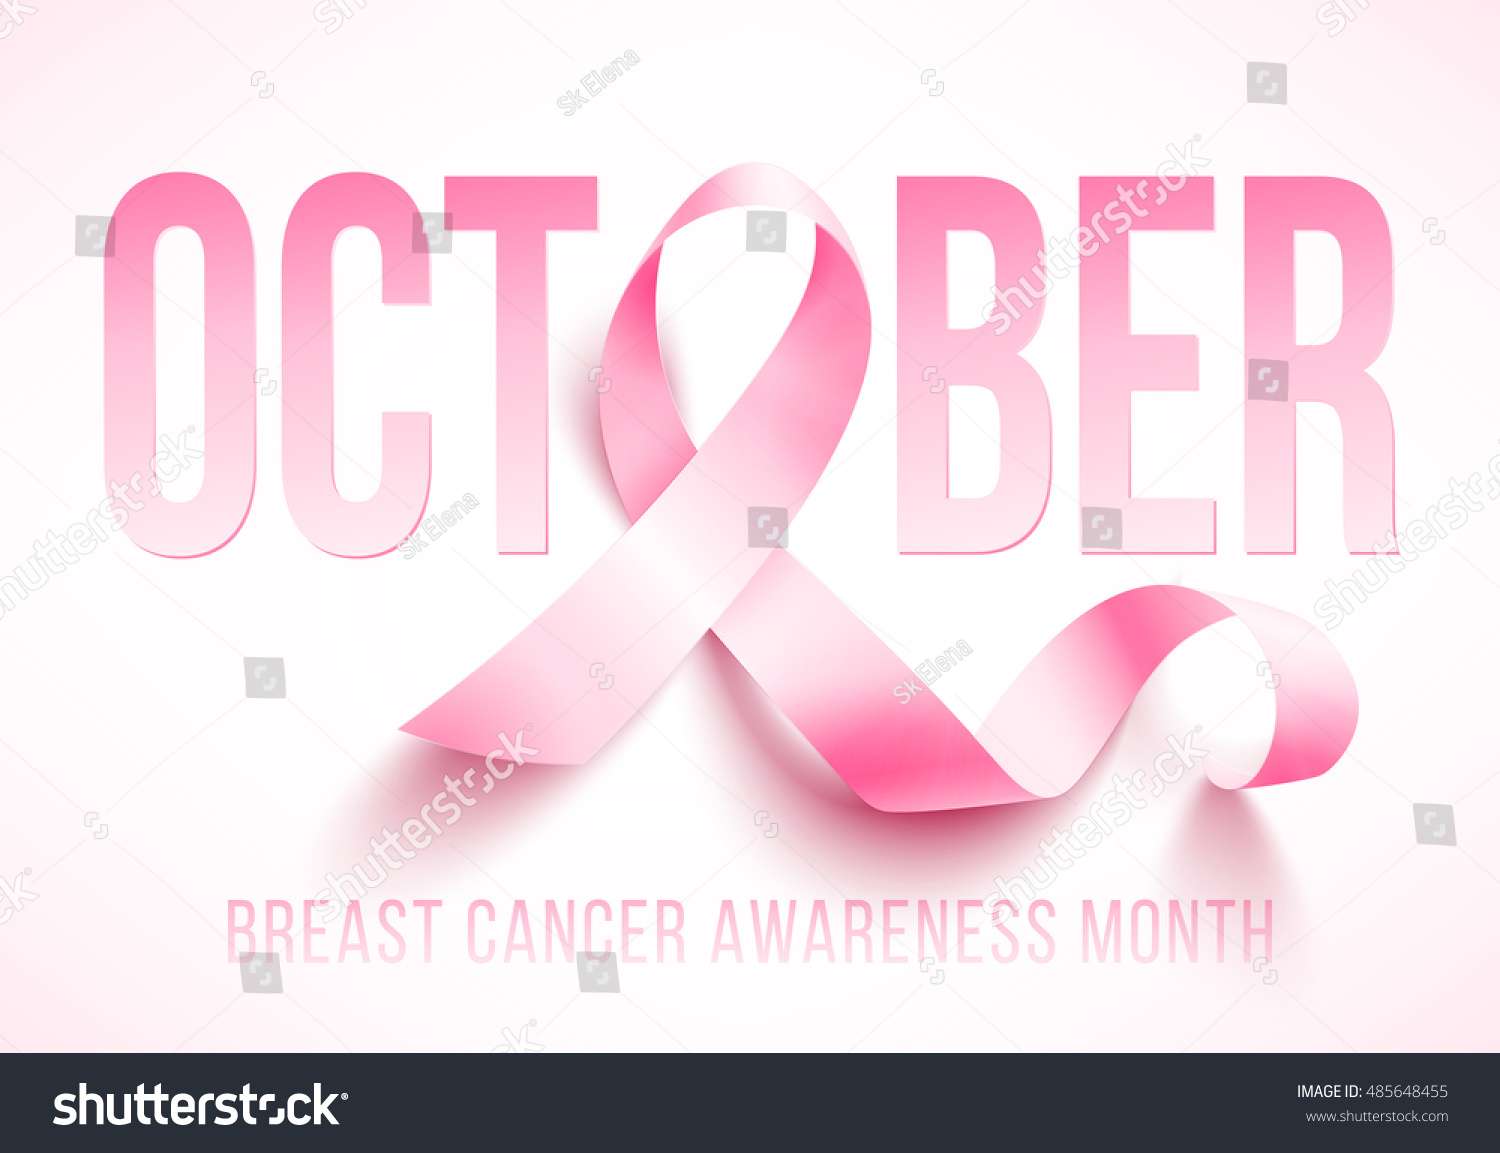 Whats the Problem With Sewing Breast Cancer Awareness Into Bras ...